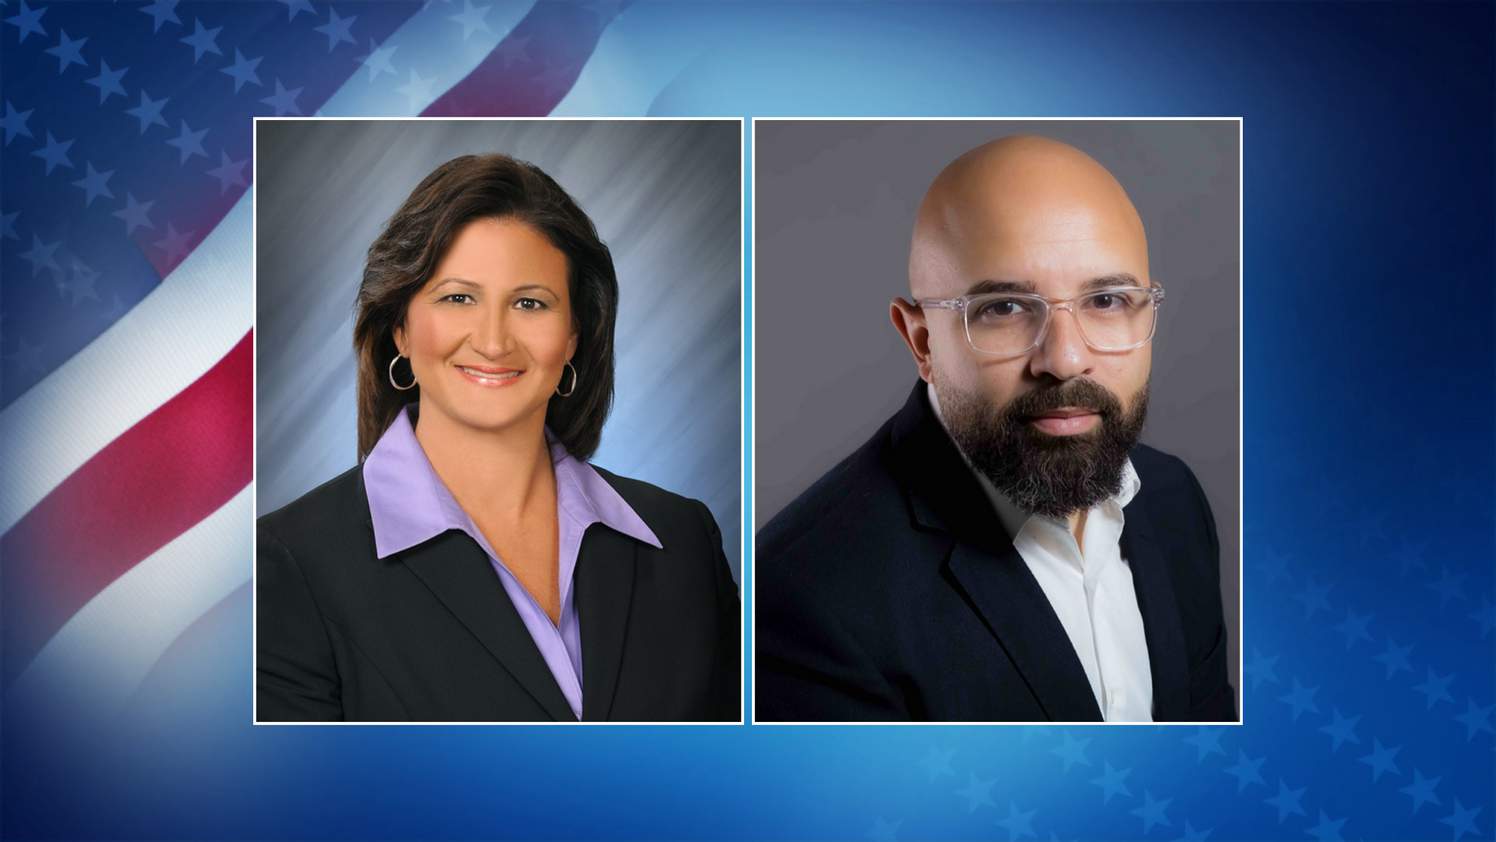 Meet the candidates: Here’s who’s running for Osceola County property appraiser